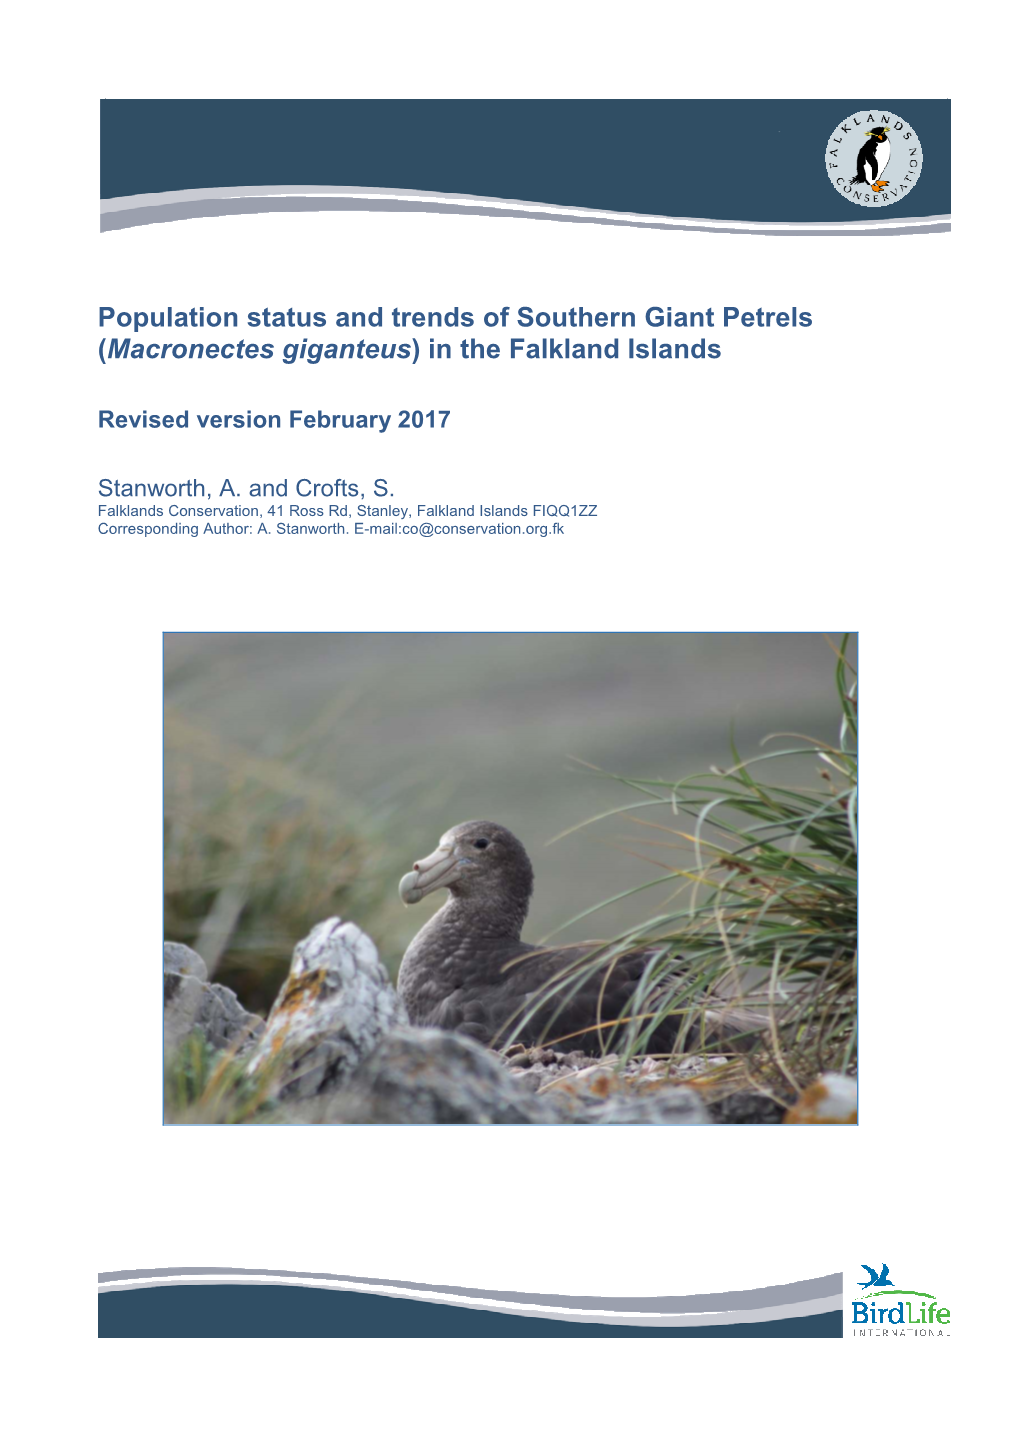 Population Status and Trends of Southern Giant Petrels (Macronectes Giganteus ) in the Falkland Islands